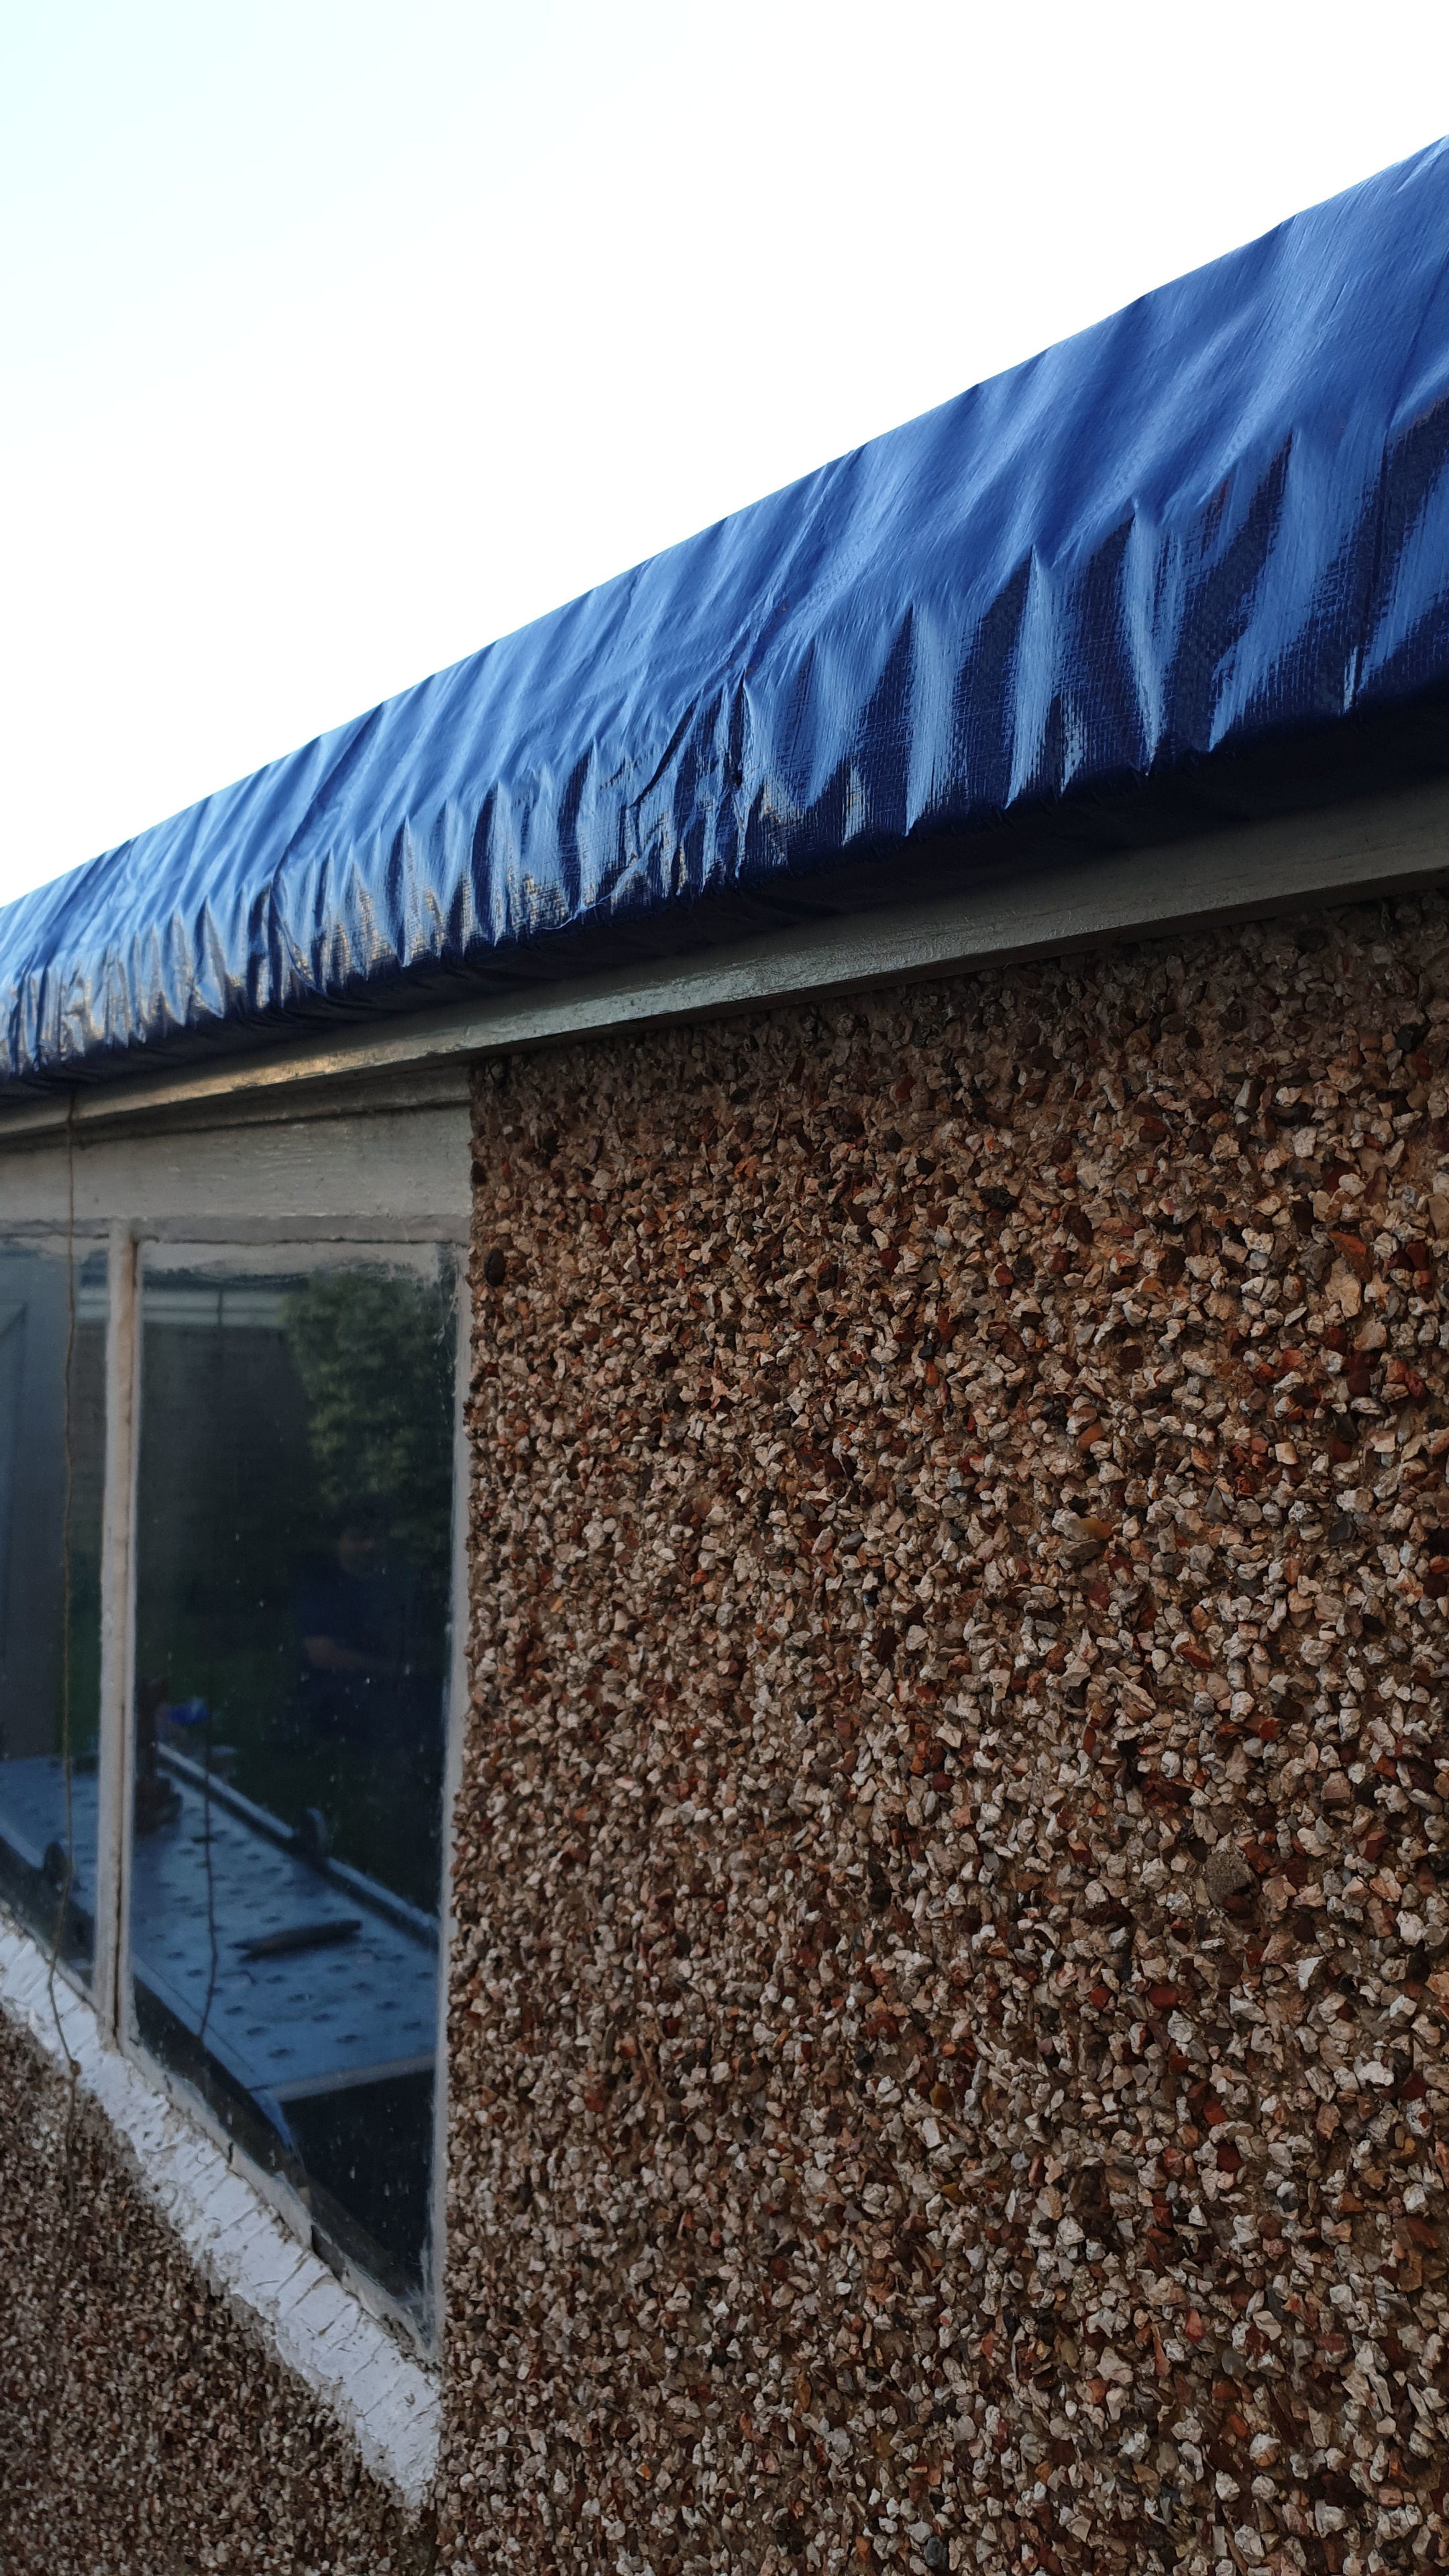 Easiest way to put a new roof on my garage? - Page 1 - Homes, Gardens and DIY - PistonHeads